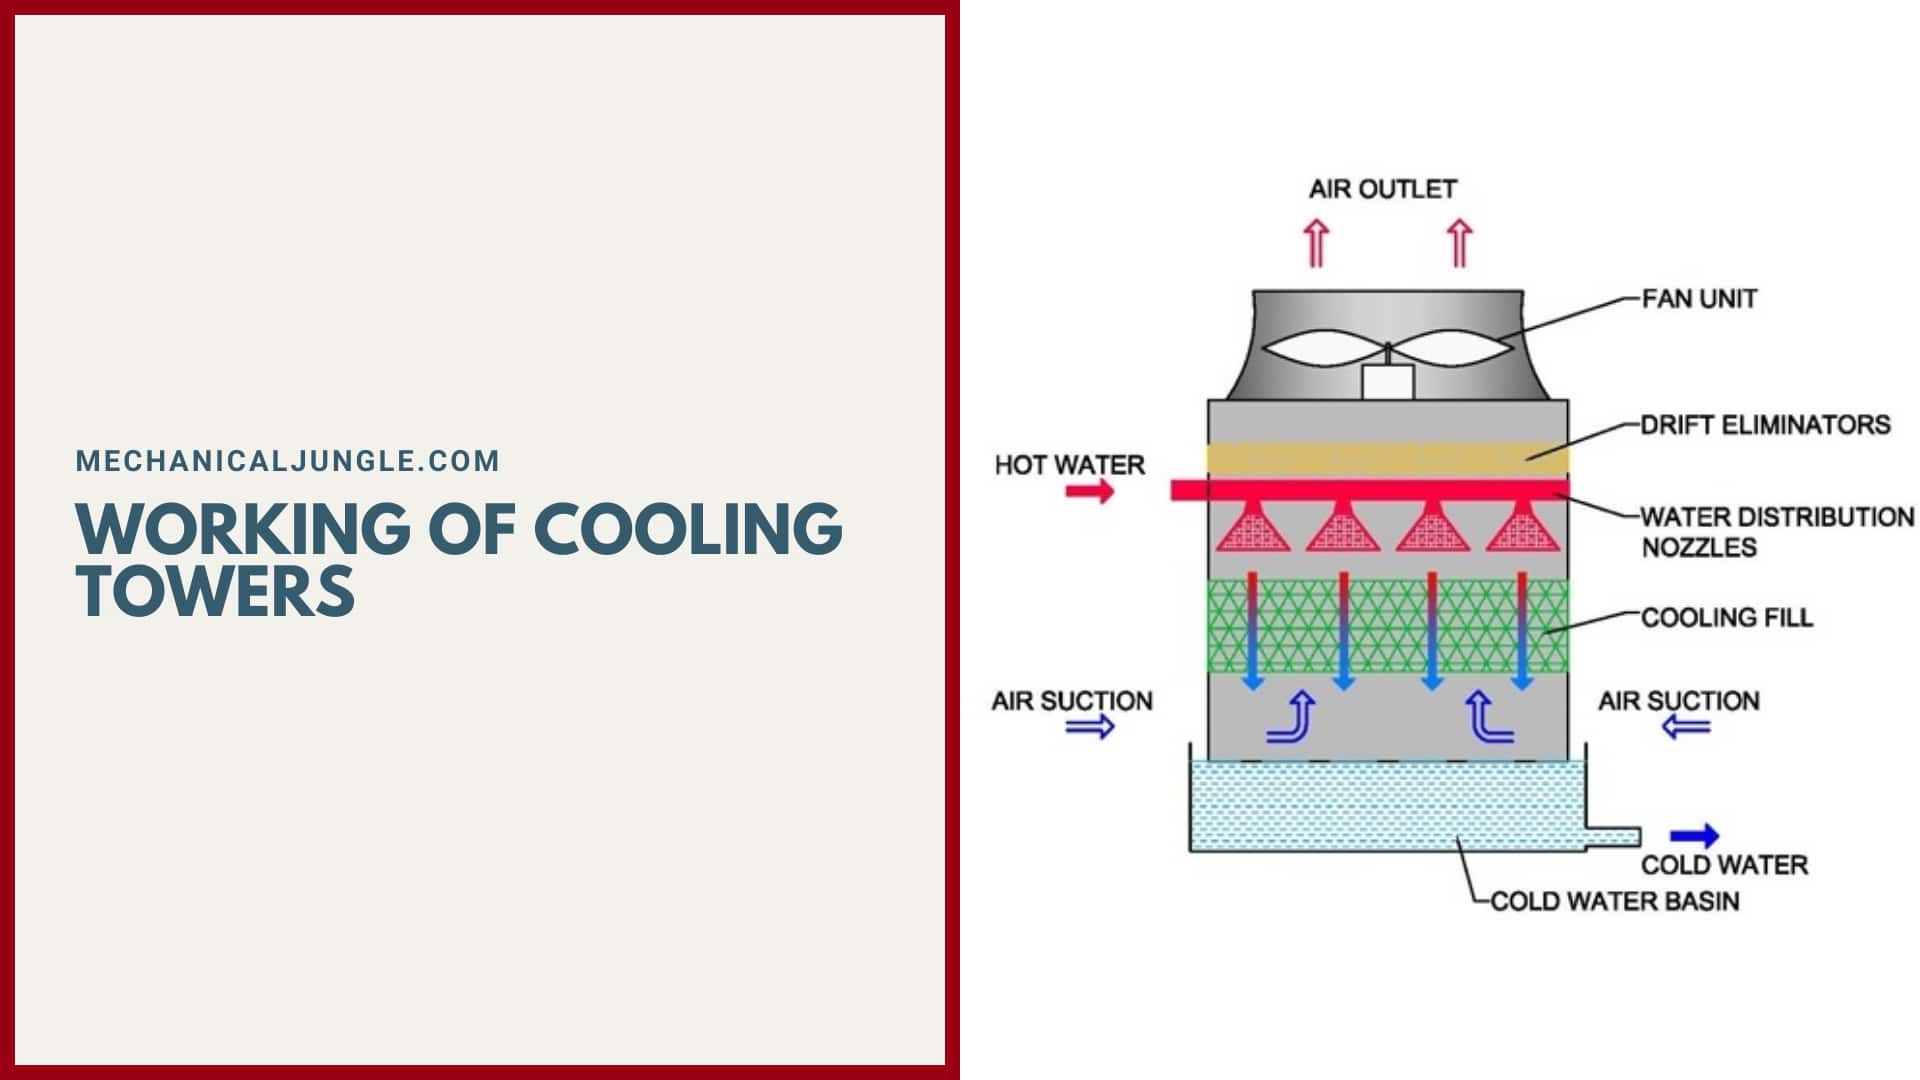 Working of Cooling Towers